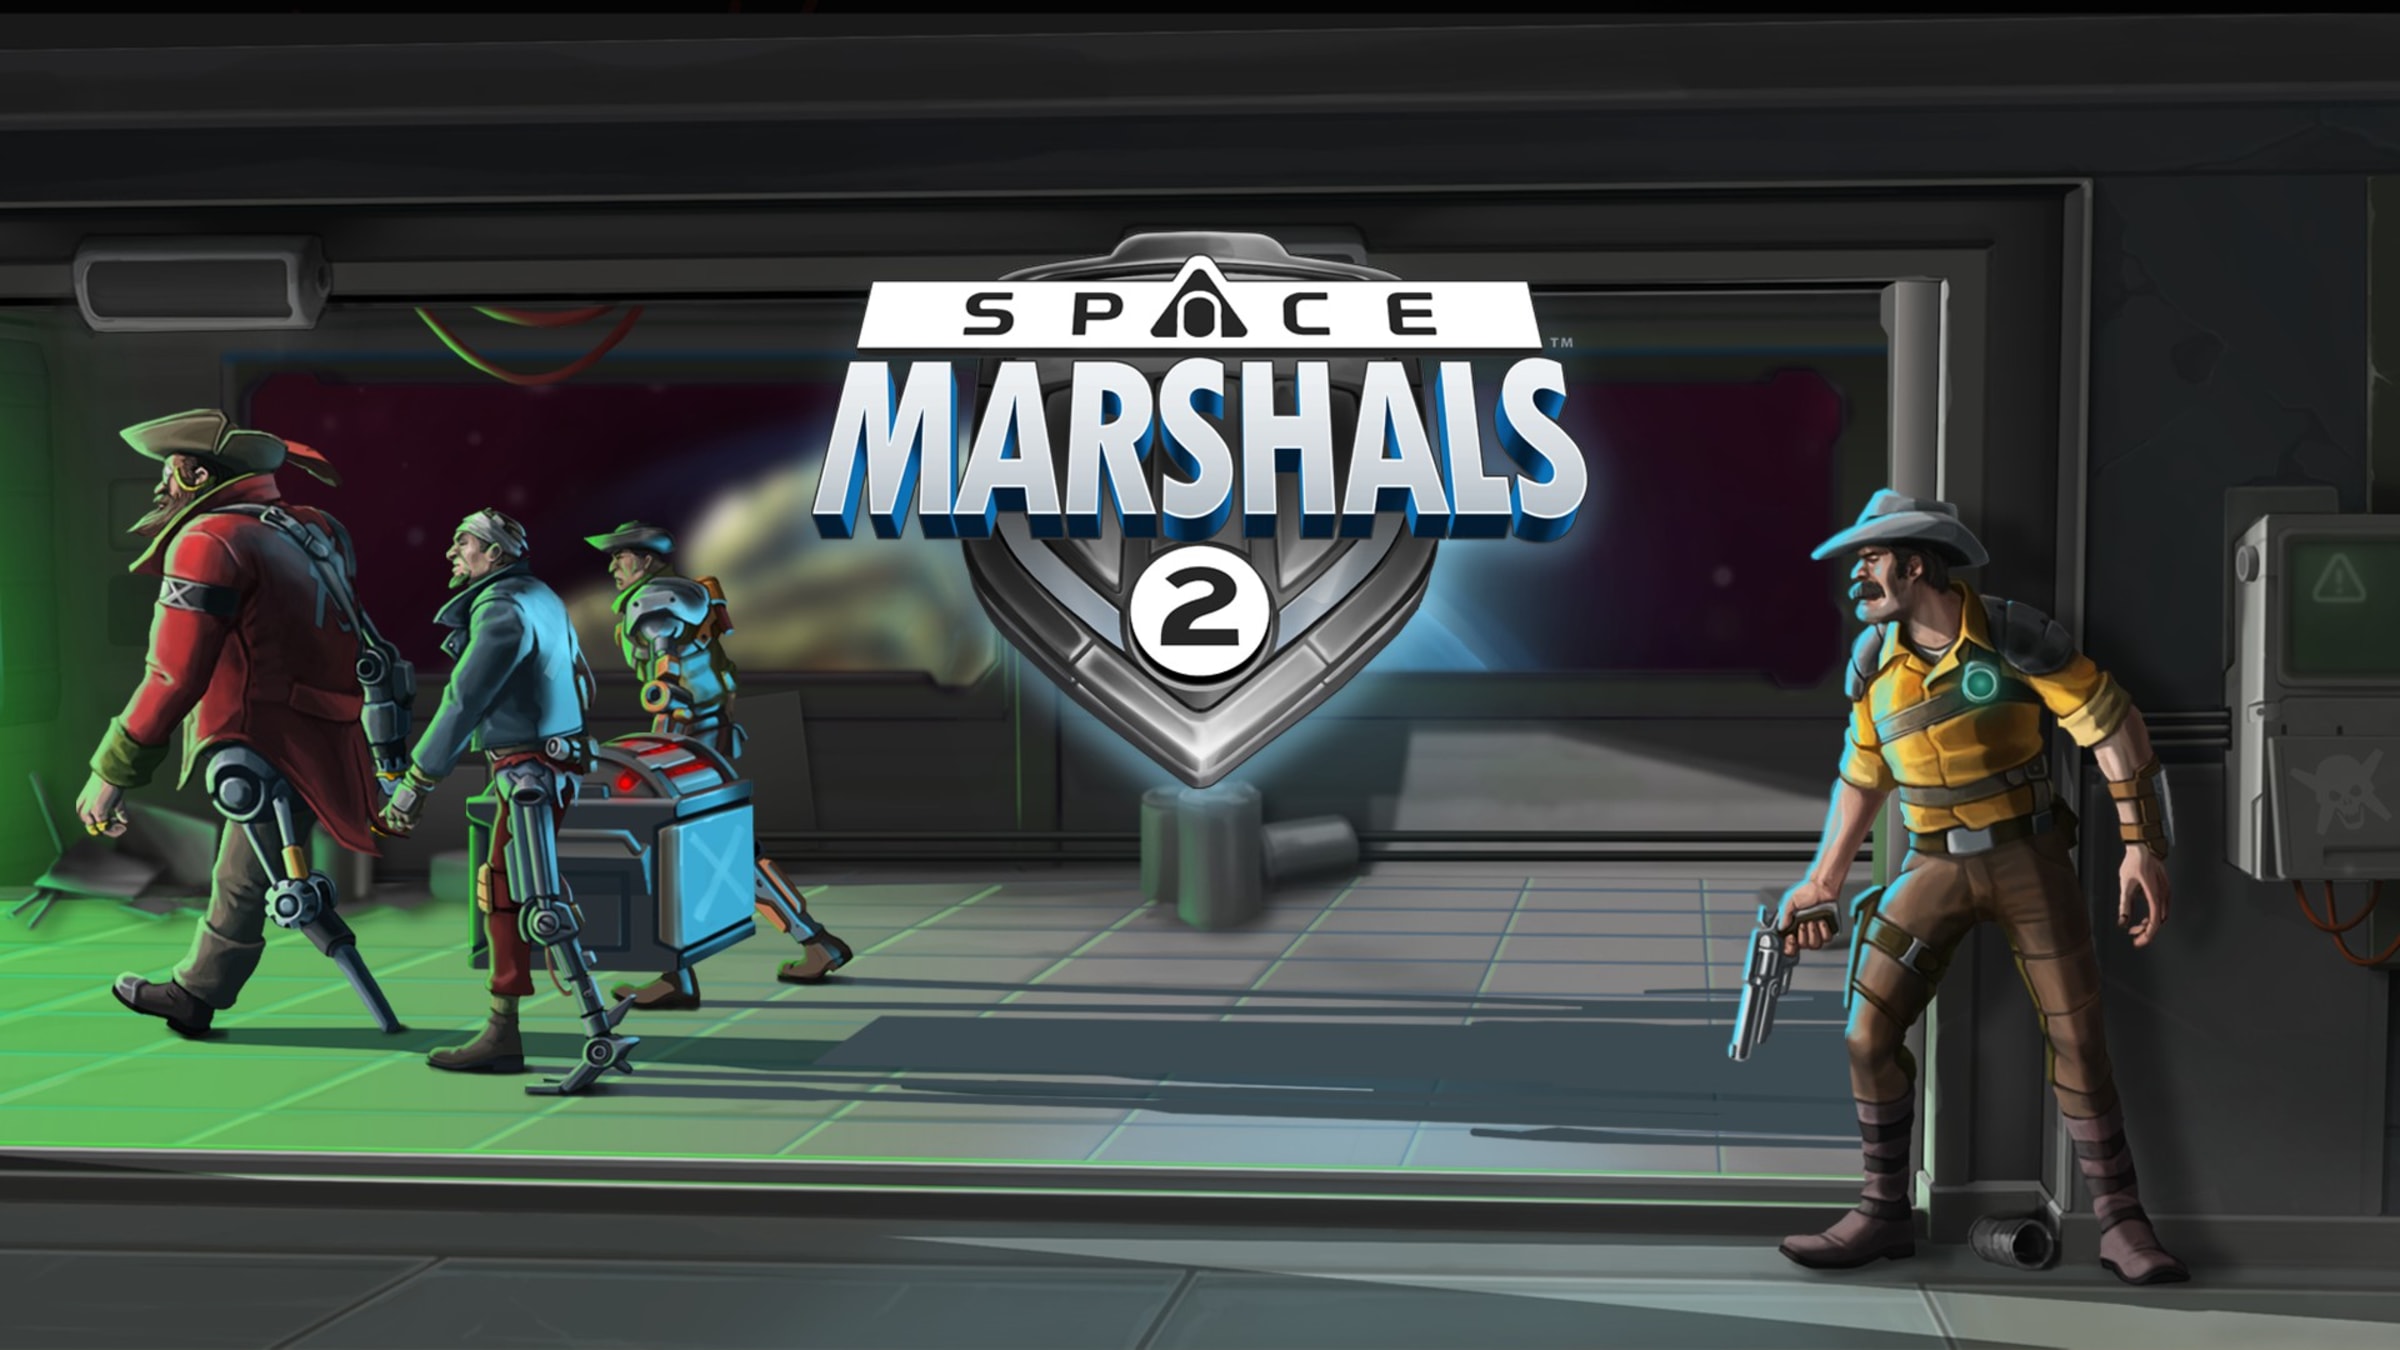 Space Marshals 2 For Nintendo Switch - Nintendo Official Site